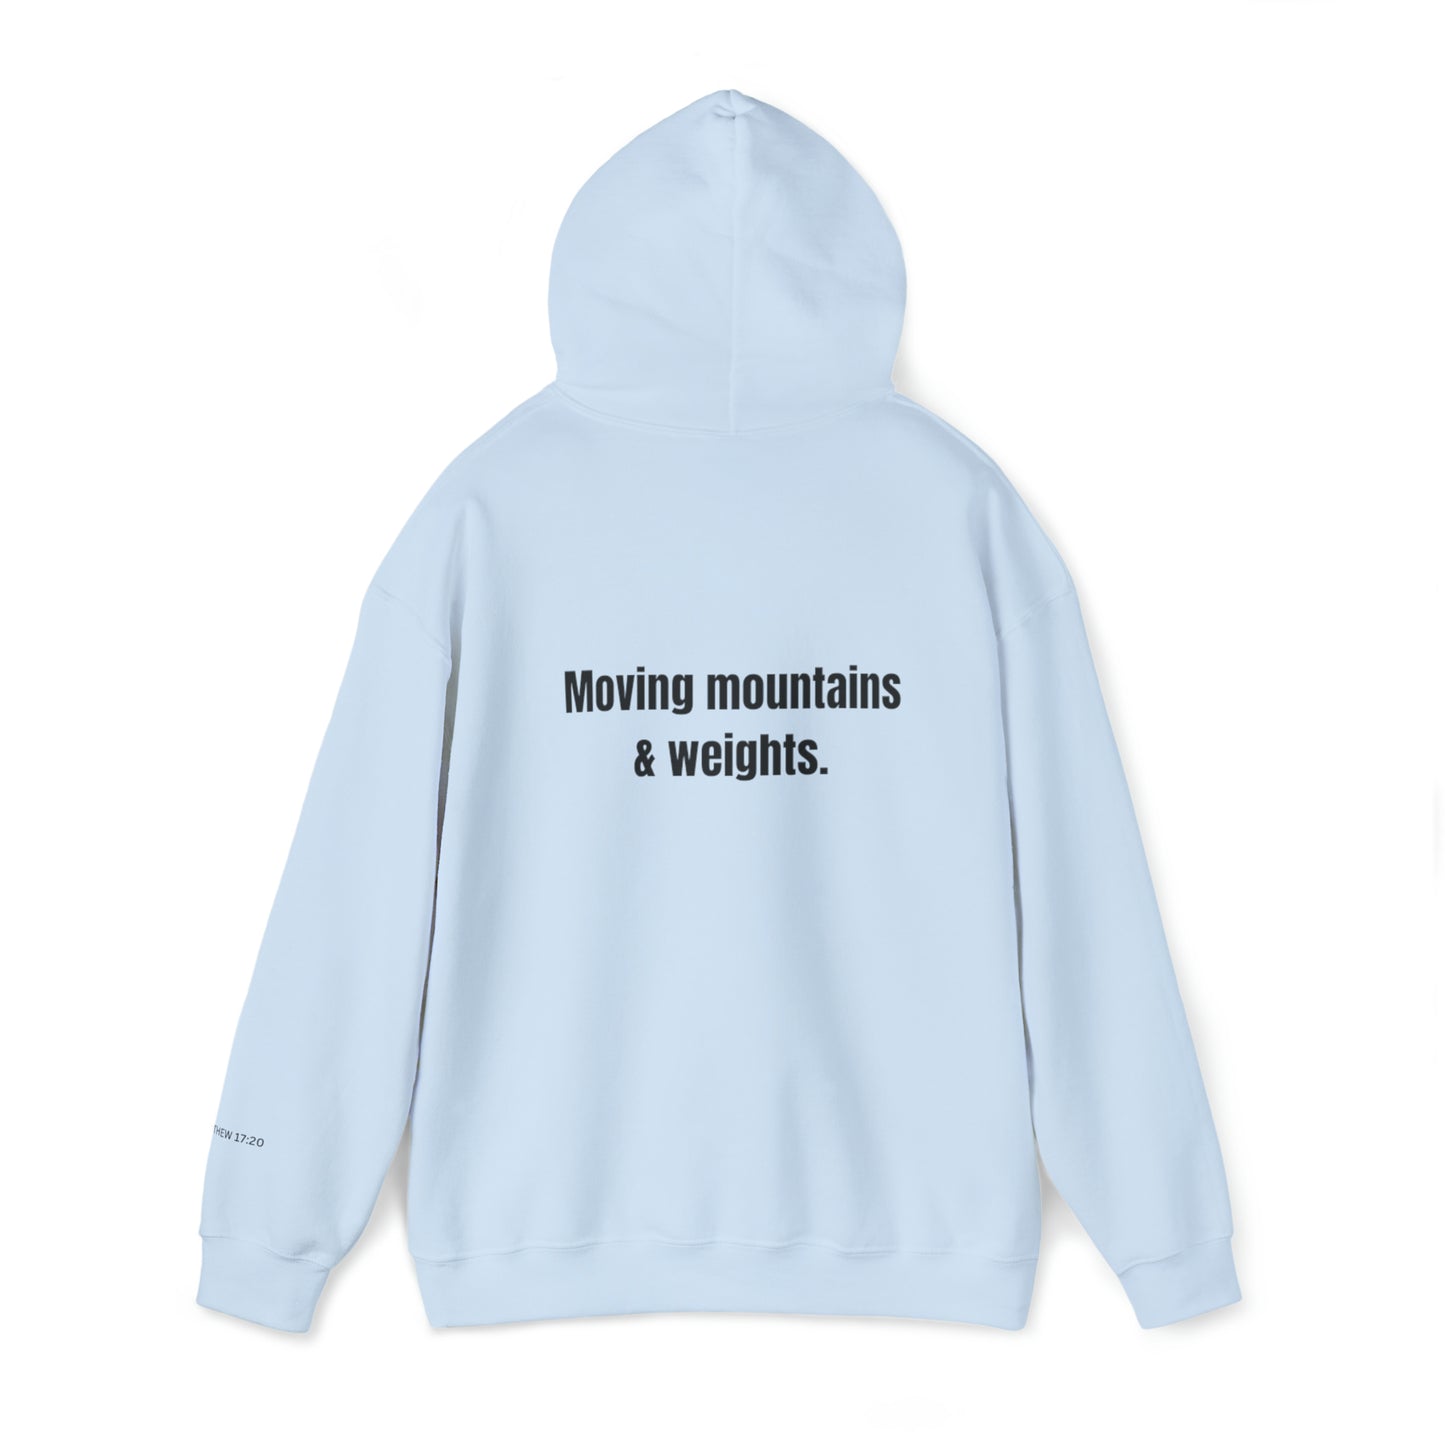 'Moving Mountains & Weights' Unisex Hooded Sweatshirt with Black Logo